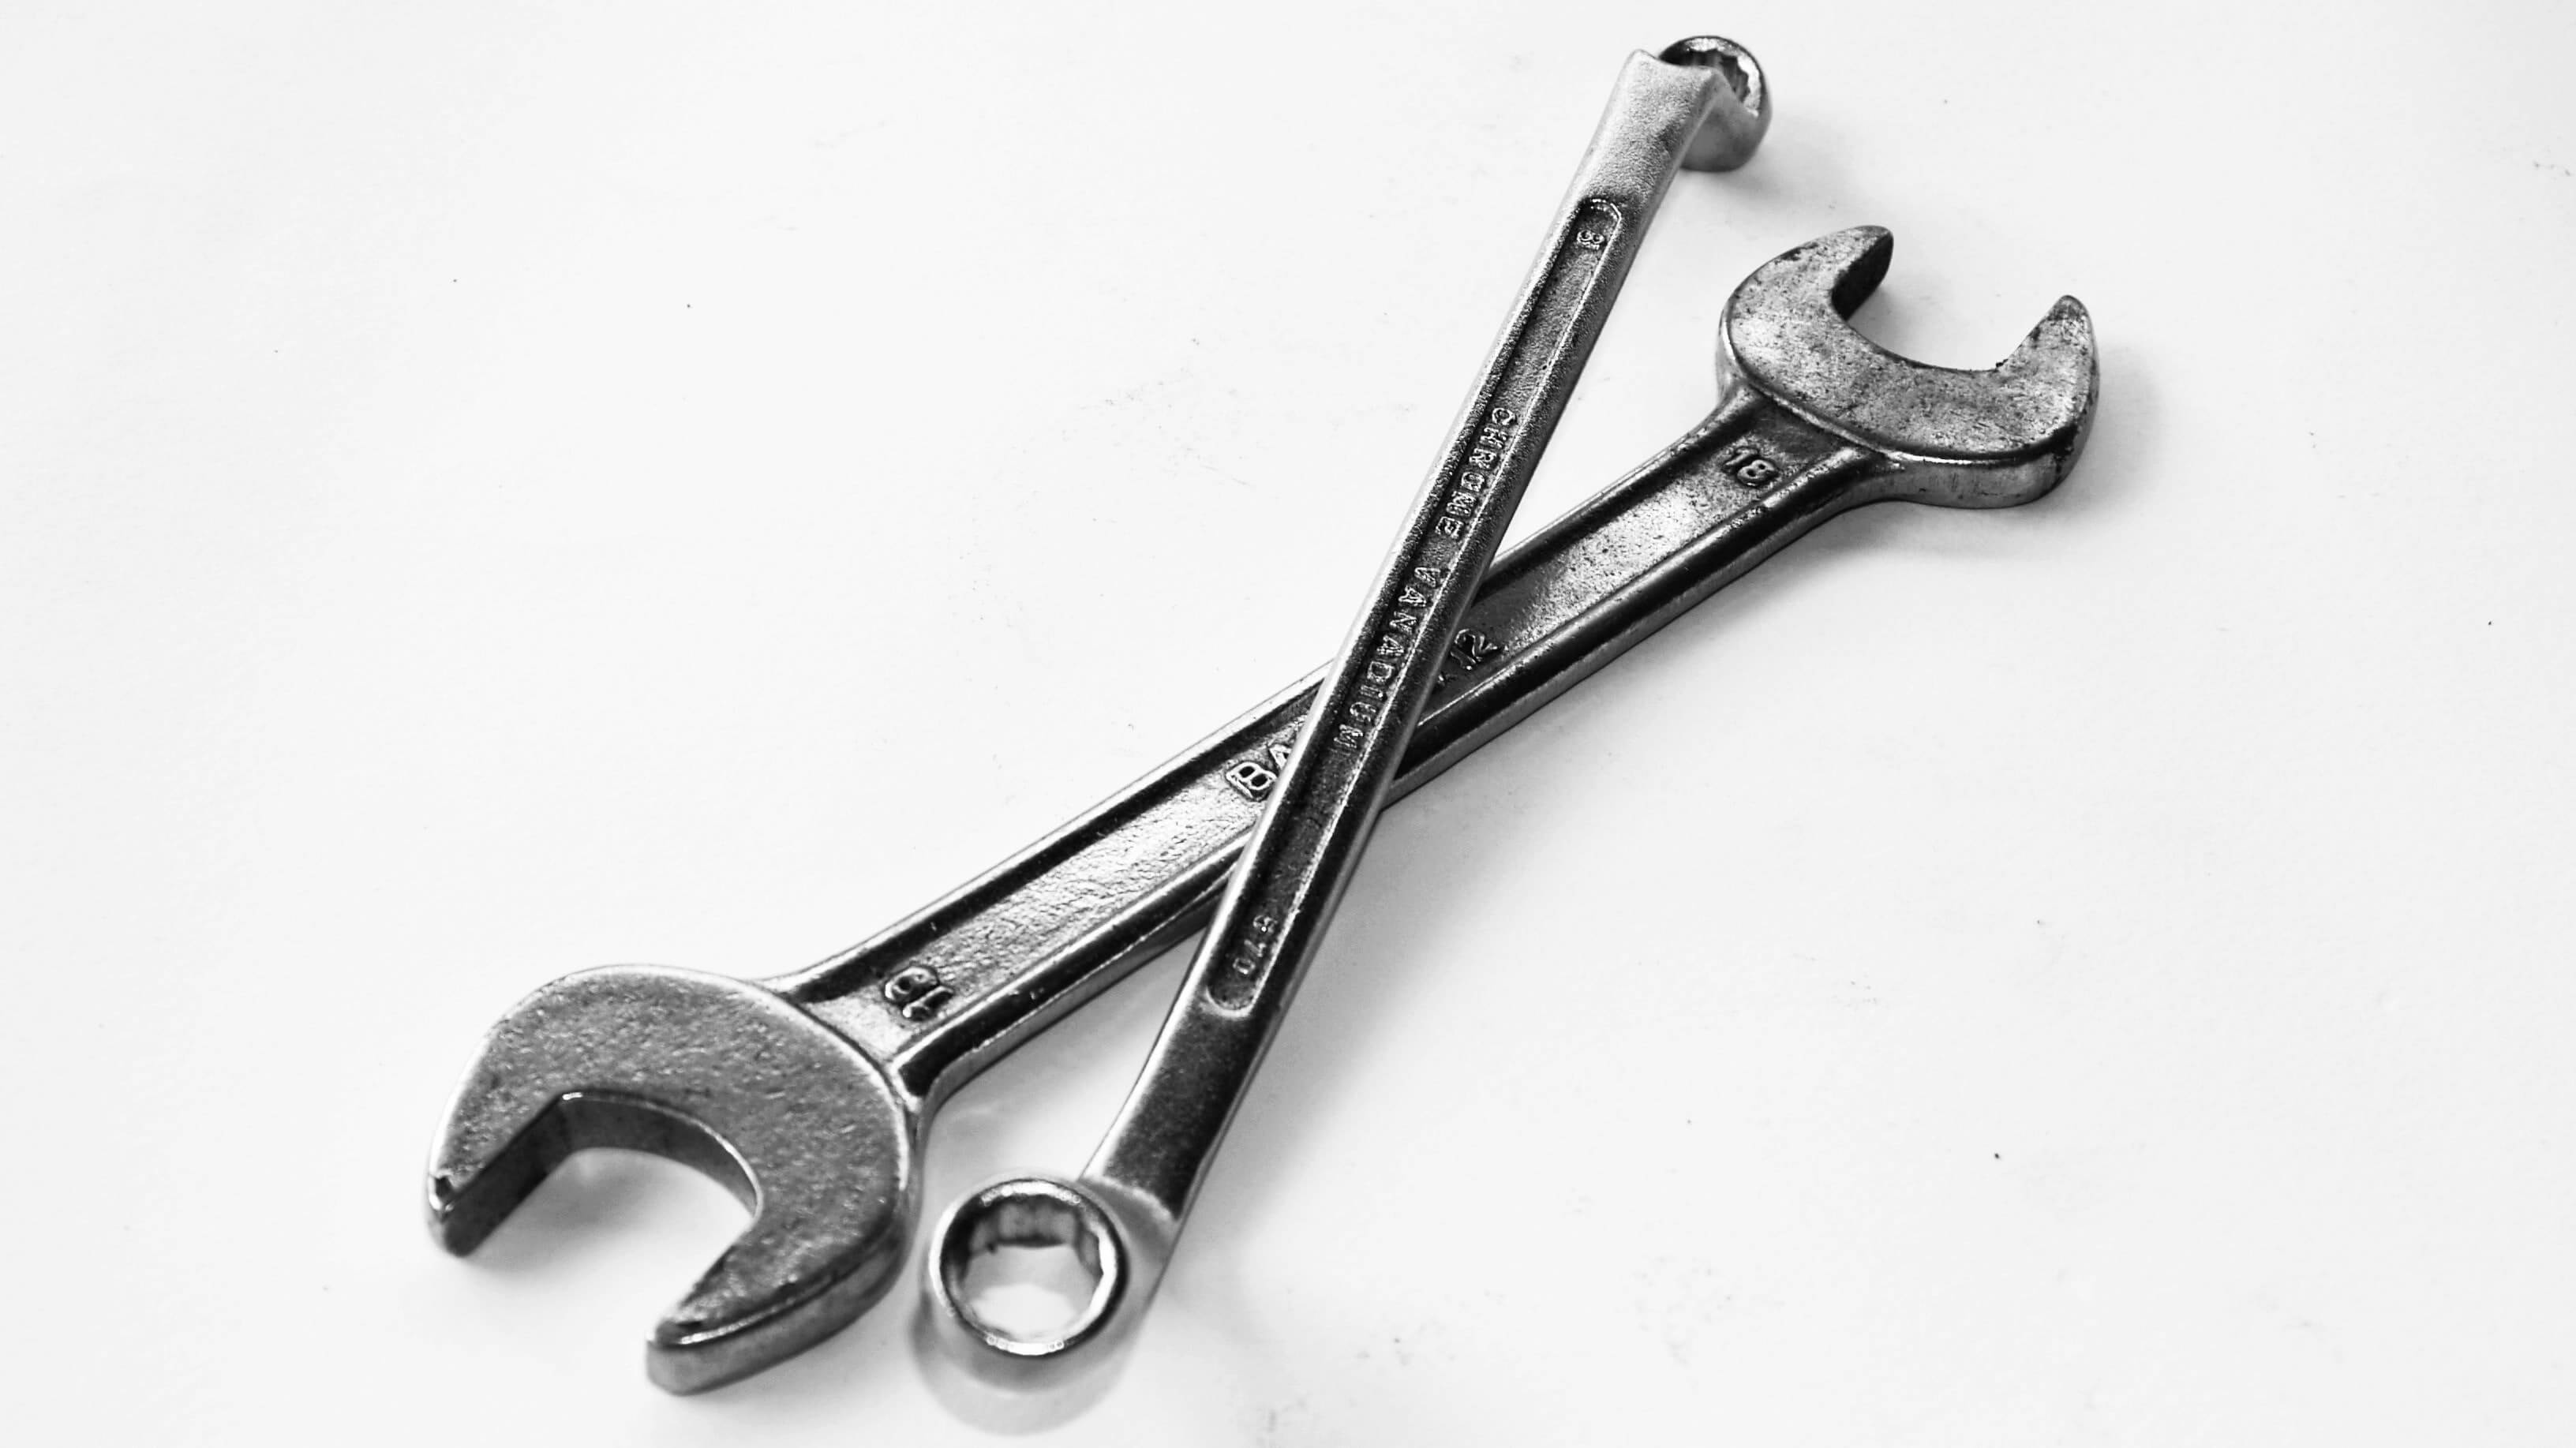 Steel tools - a spanner and wrench